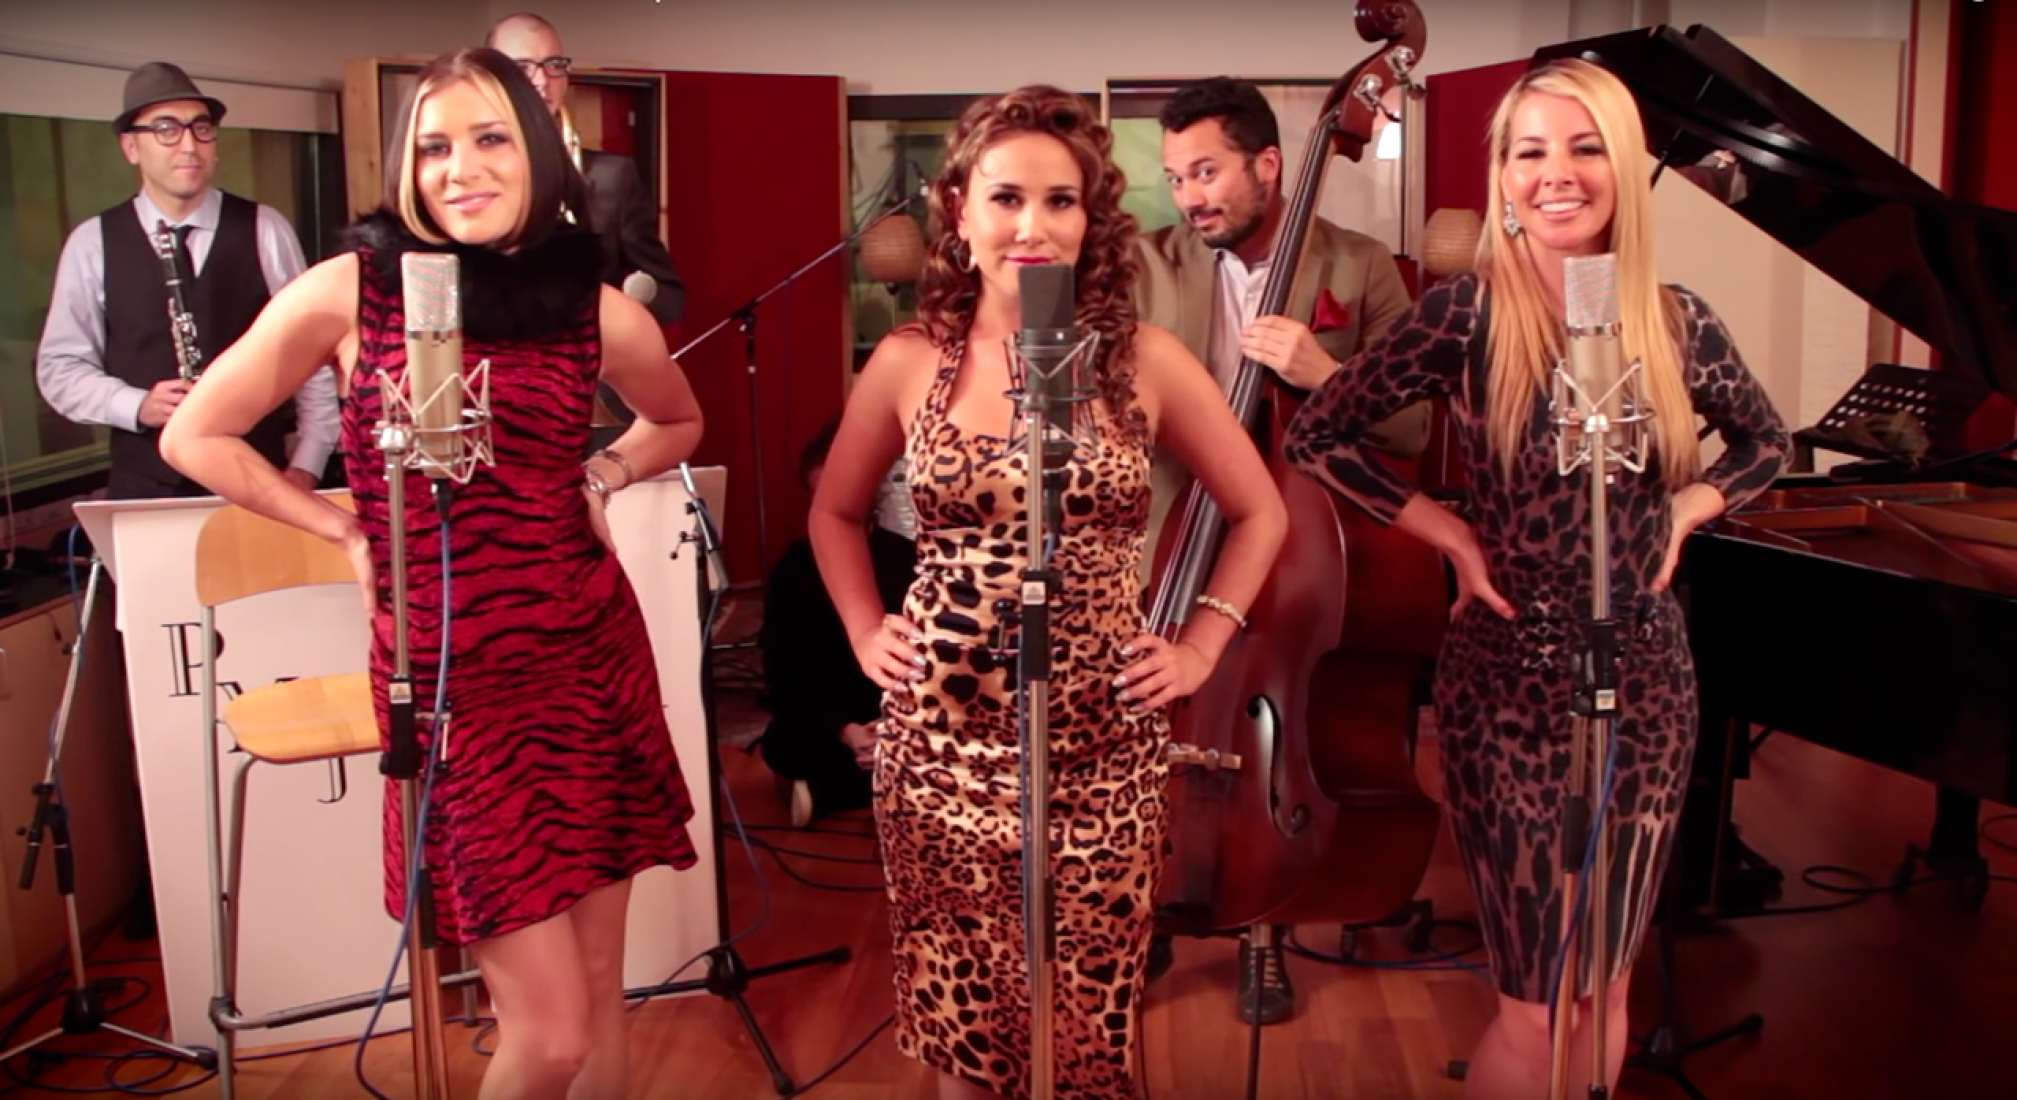 All About That Bass by Postmodern Jukebox. European Tour Version The